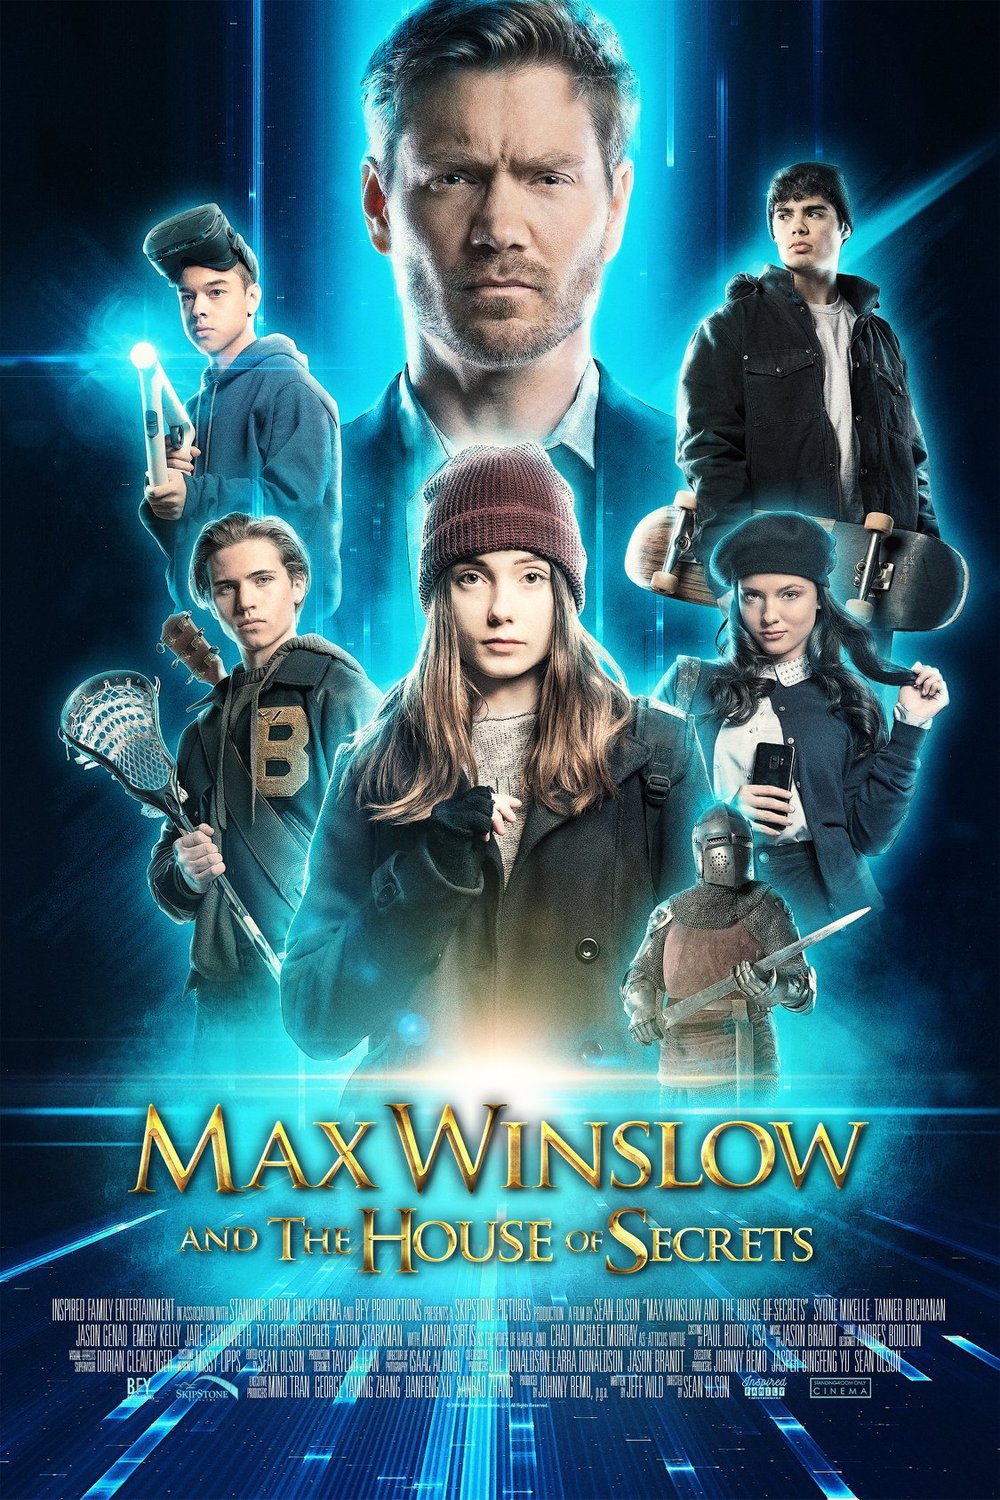 Poster of the movie Max Winslow and the House of Secrets